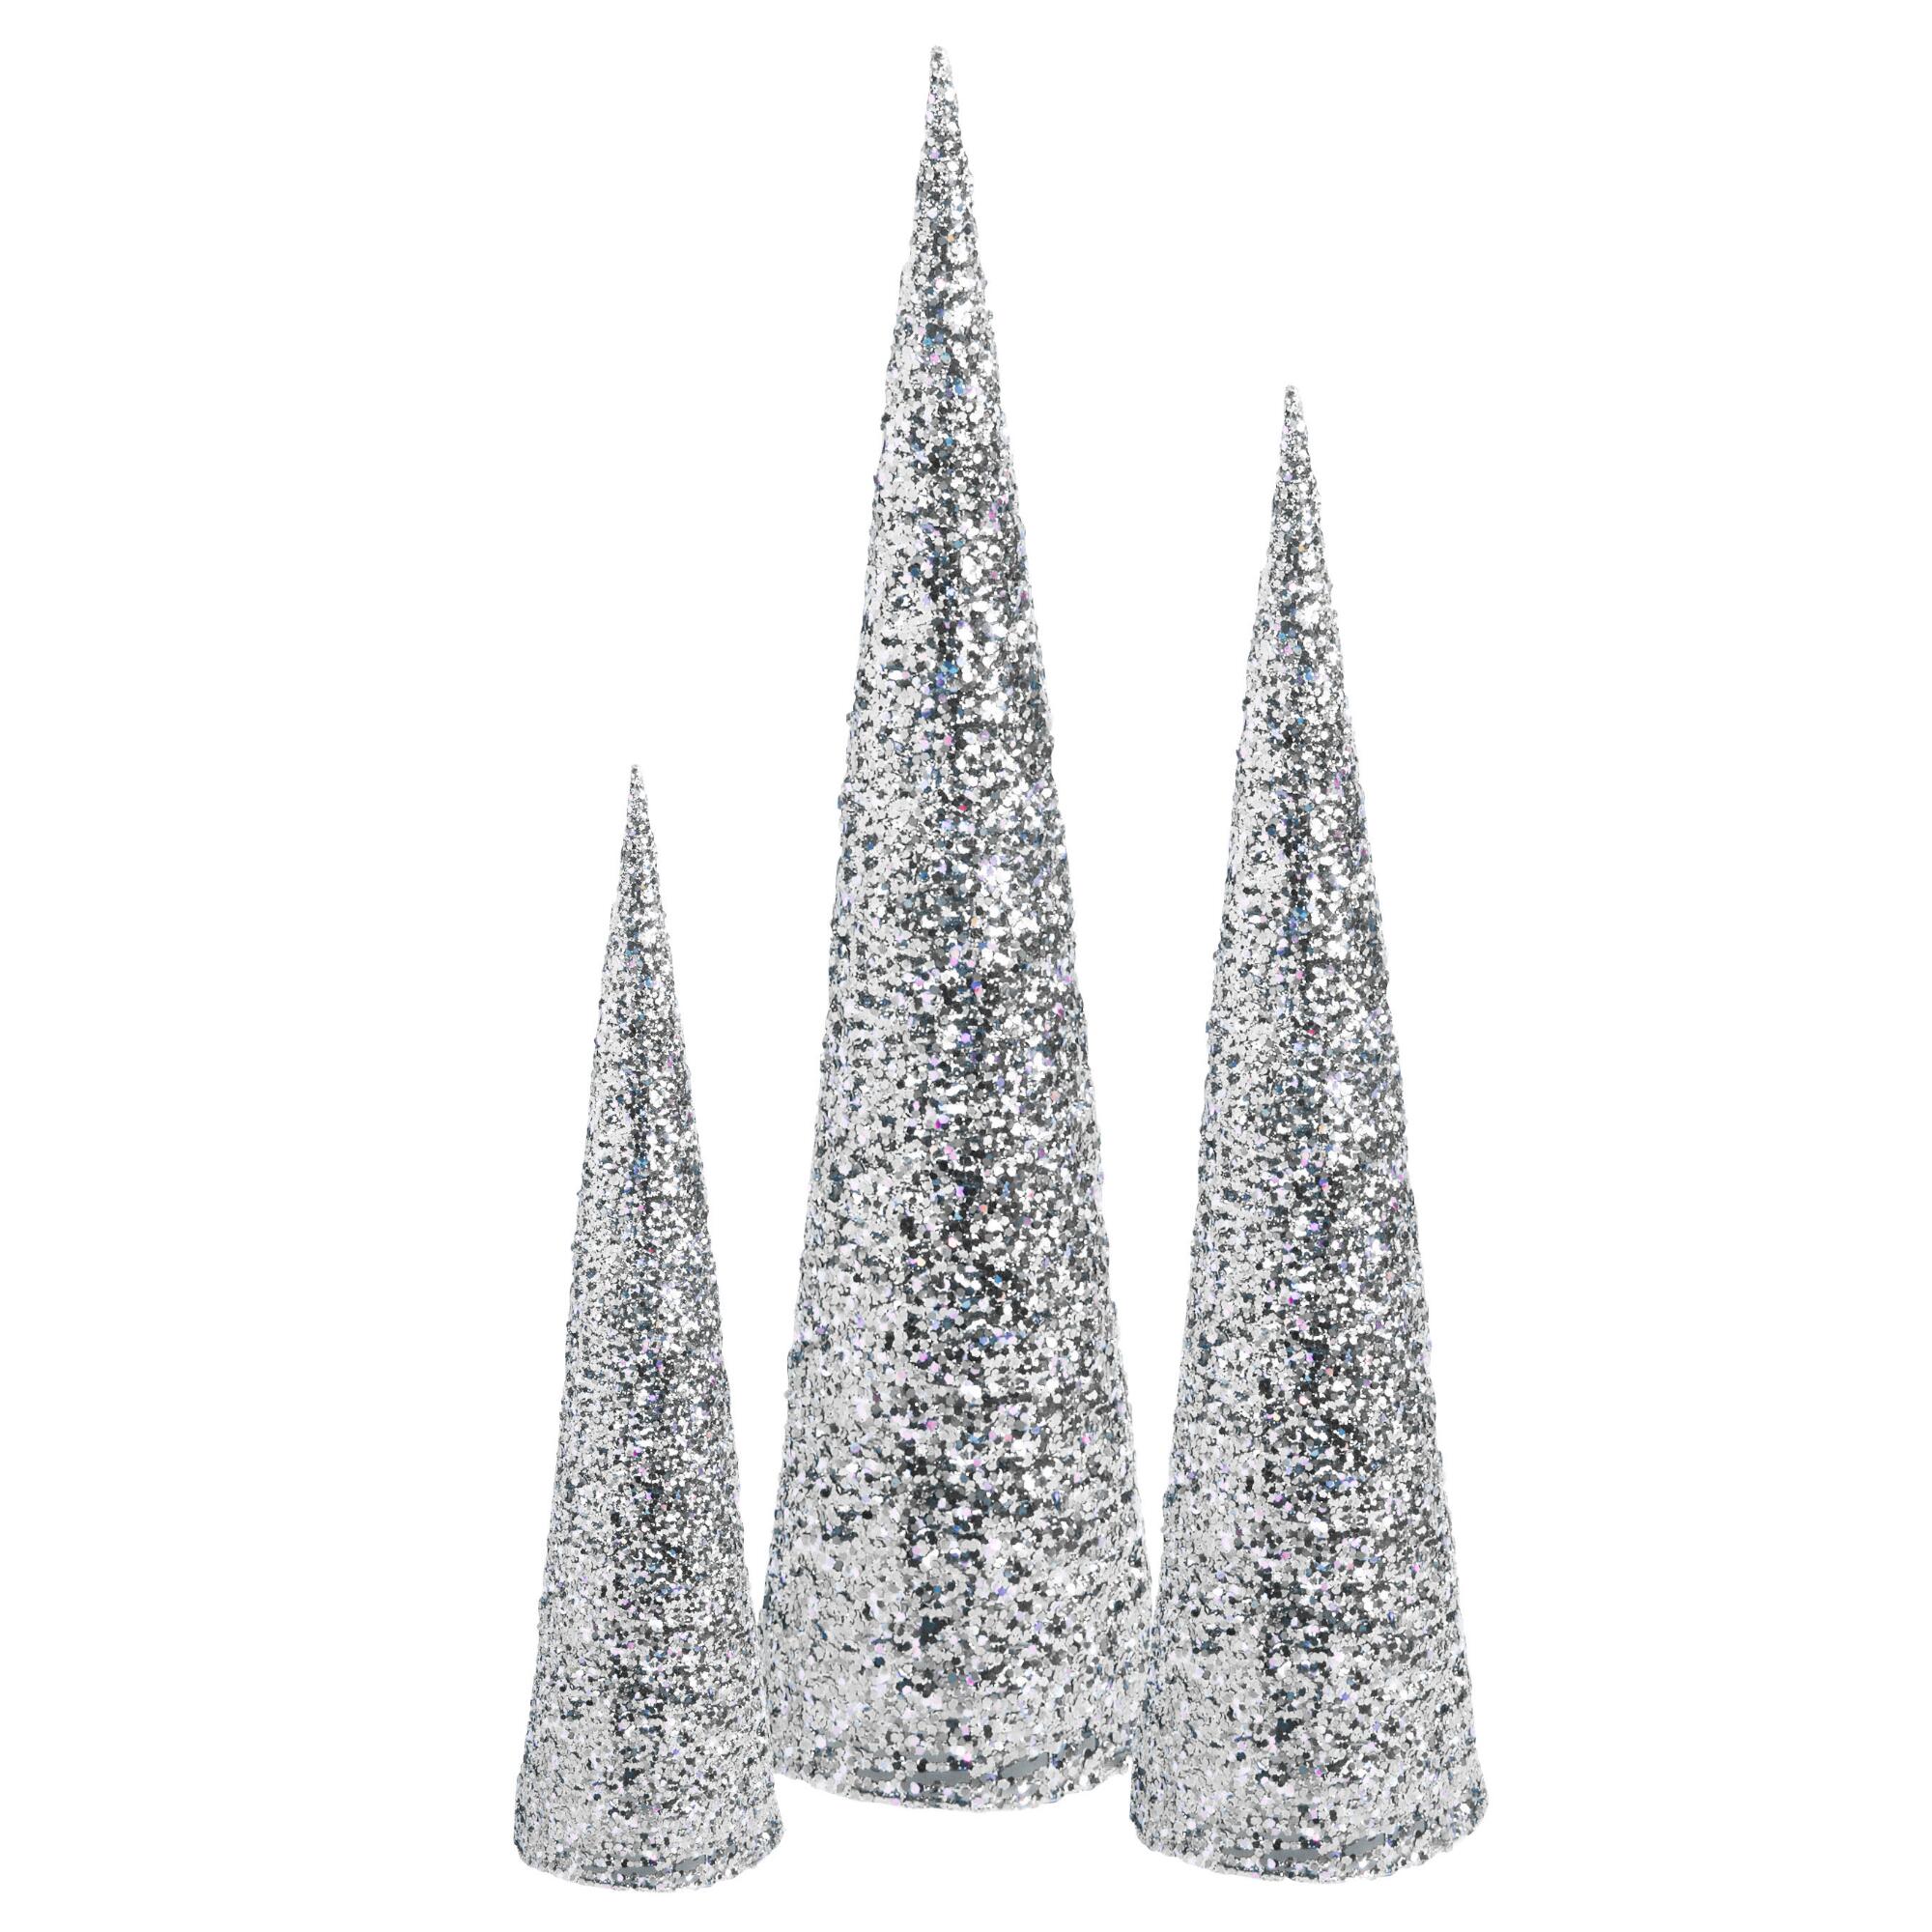 Glitter Cone Trees Set | Christmas Tree Shops andThat!